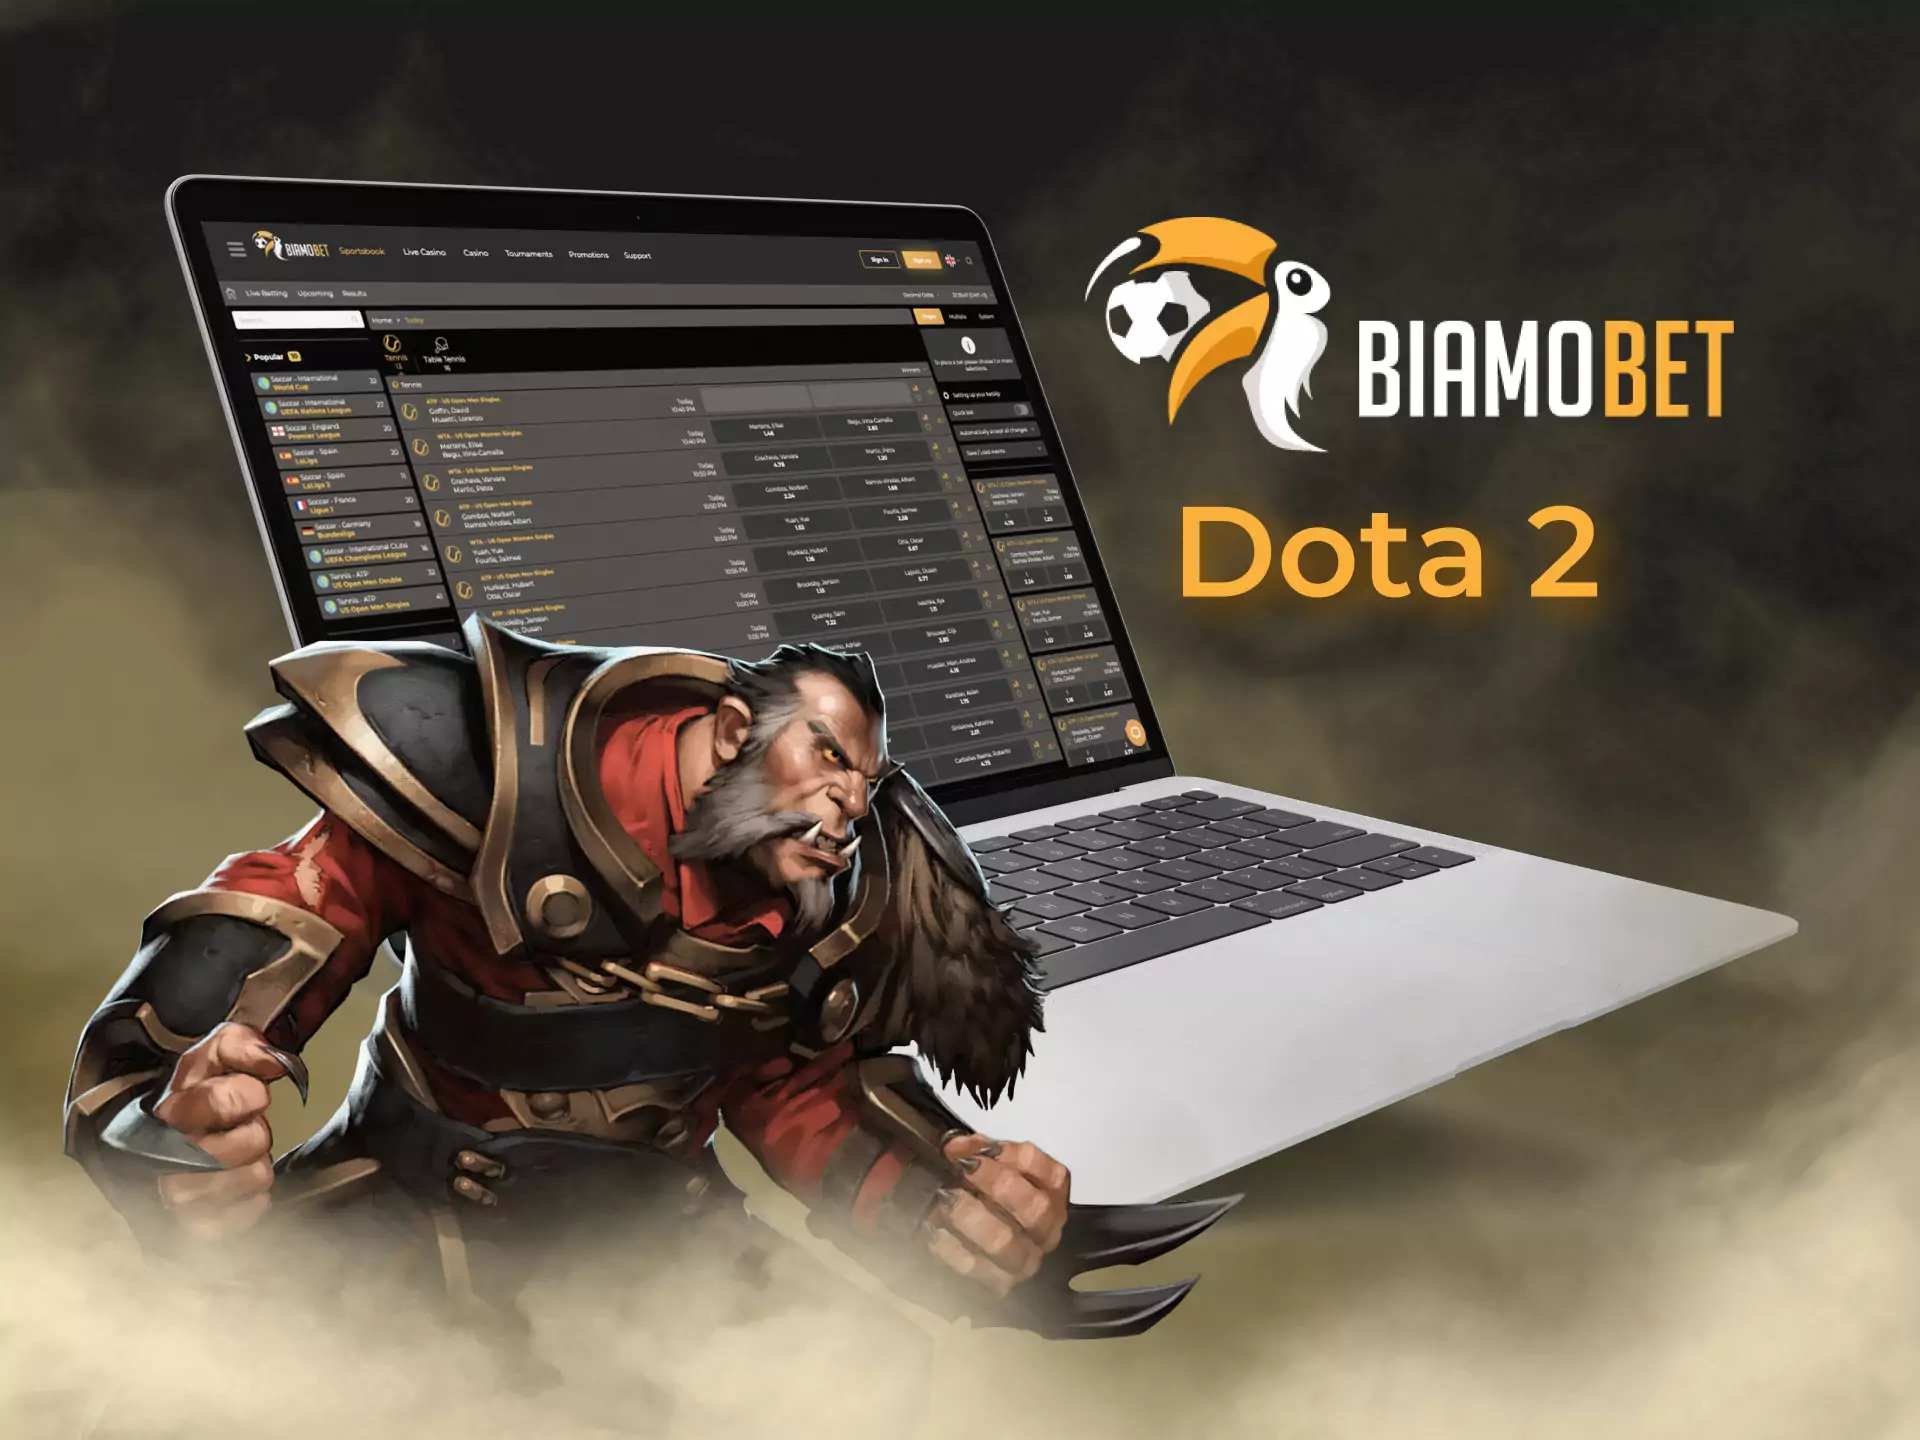 If you follow Dota 2 matches, predict the result on Biamobet.